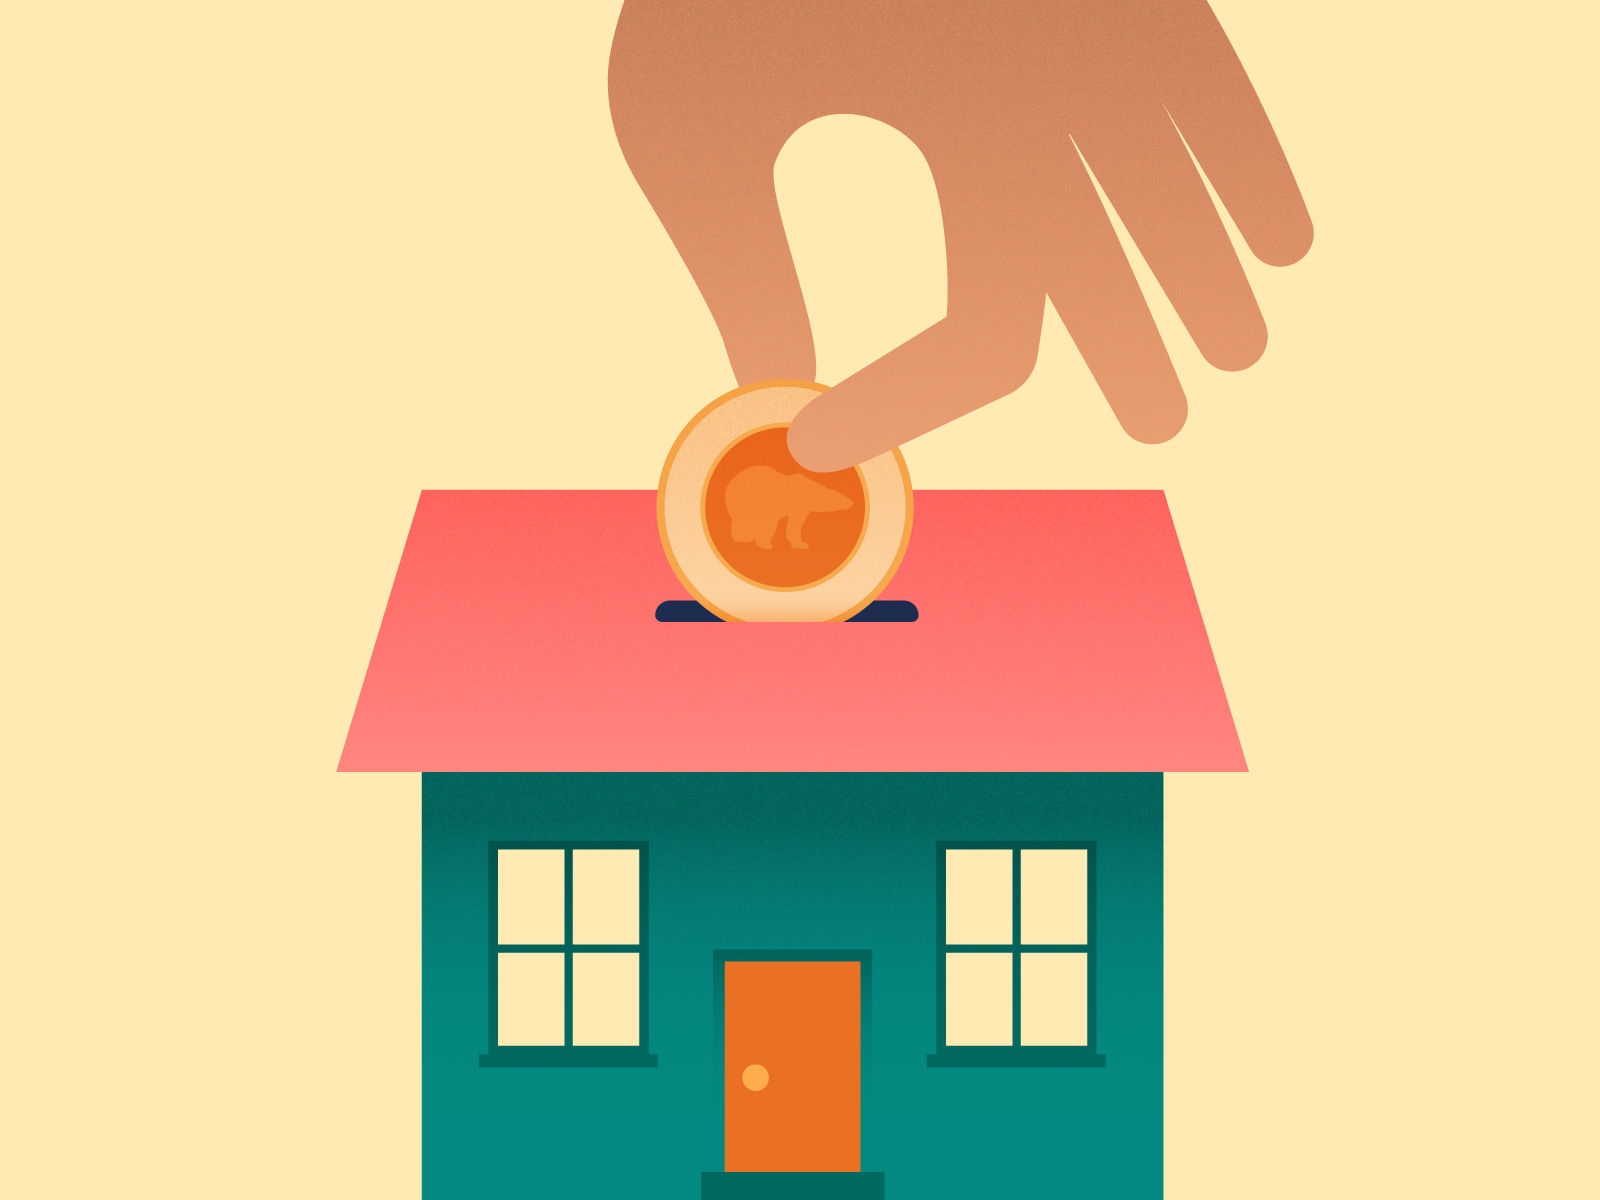 Illustration of a hand depositing a coin into a slot in the roof of a house, as though it's a piggy bank.